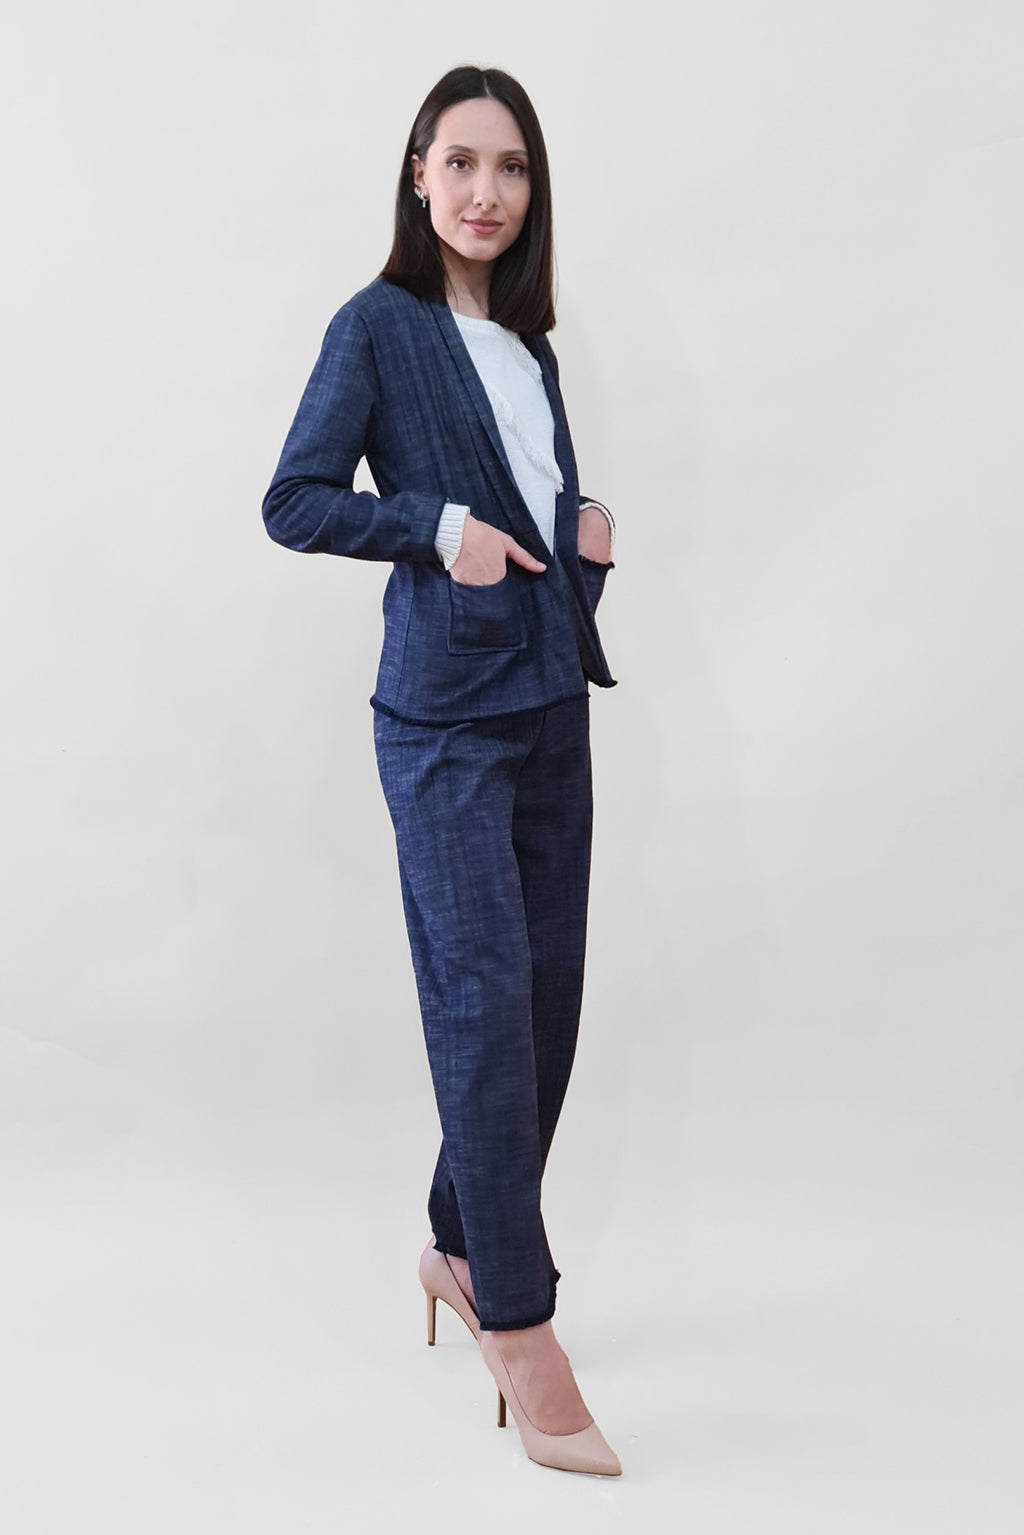 Woman wearing a navy blue plaid suit with white top and nude heels against a plain background